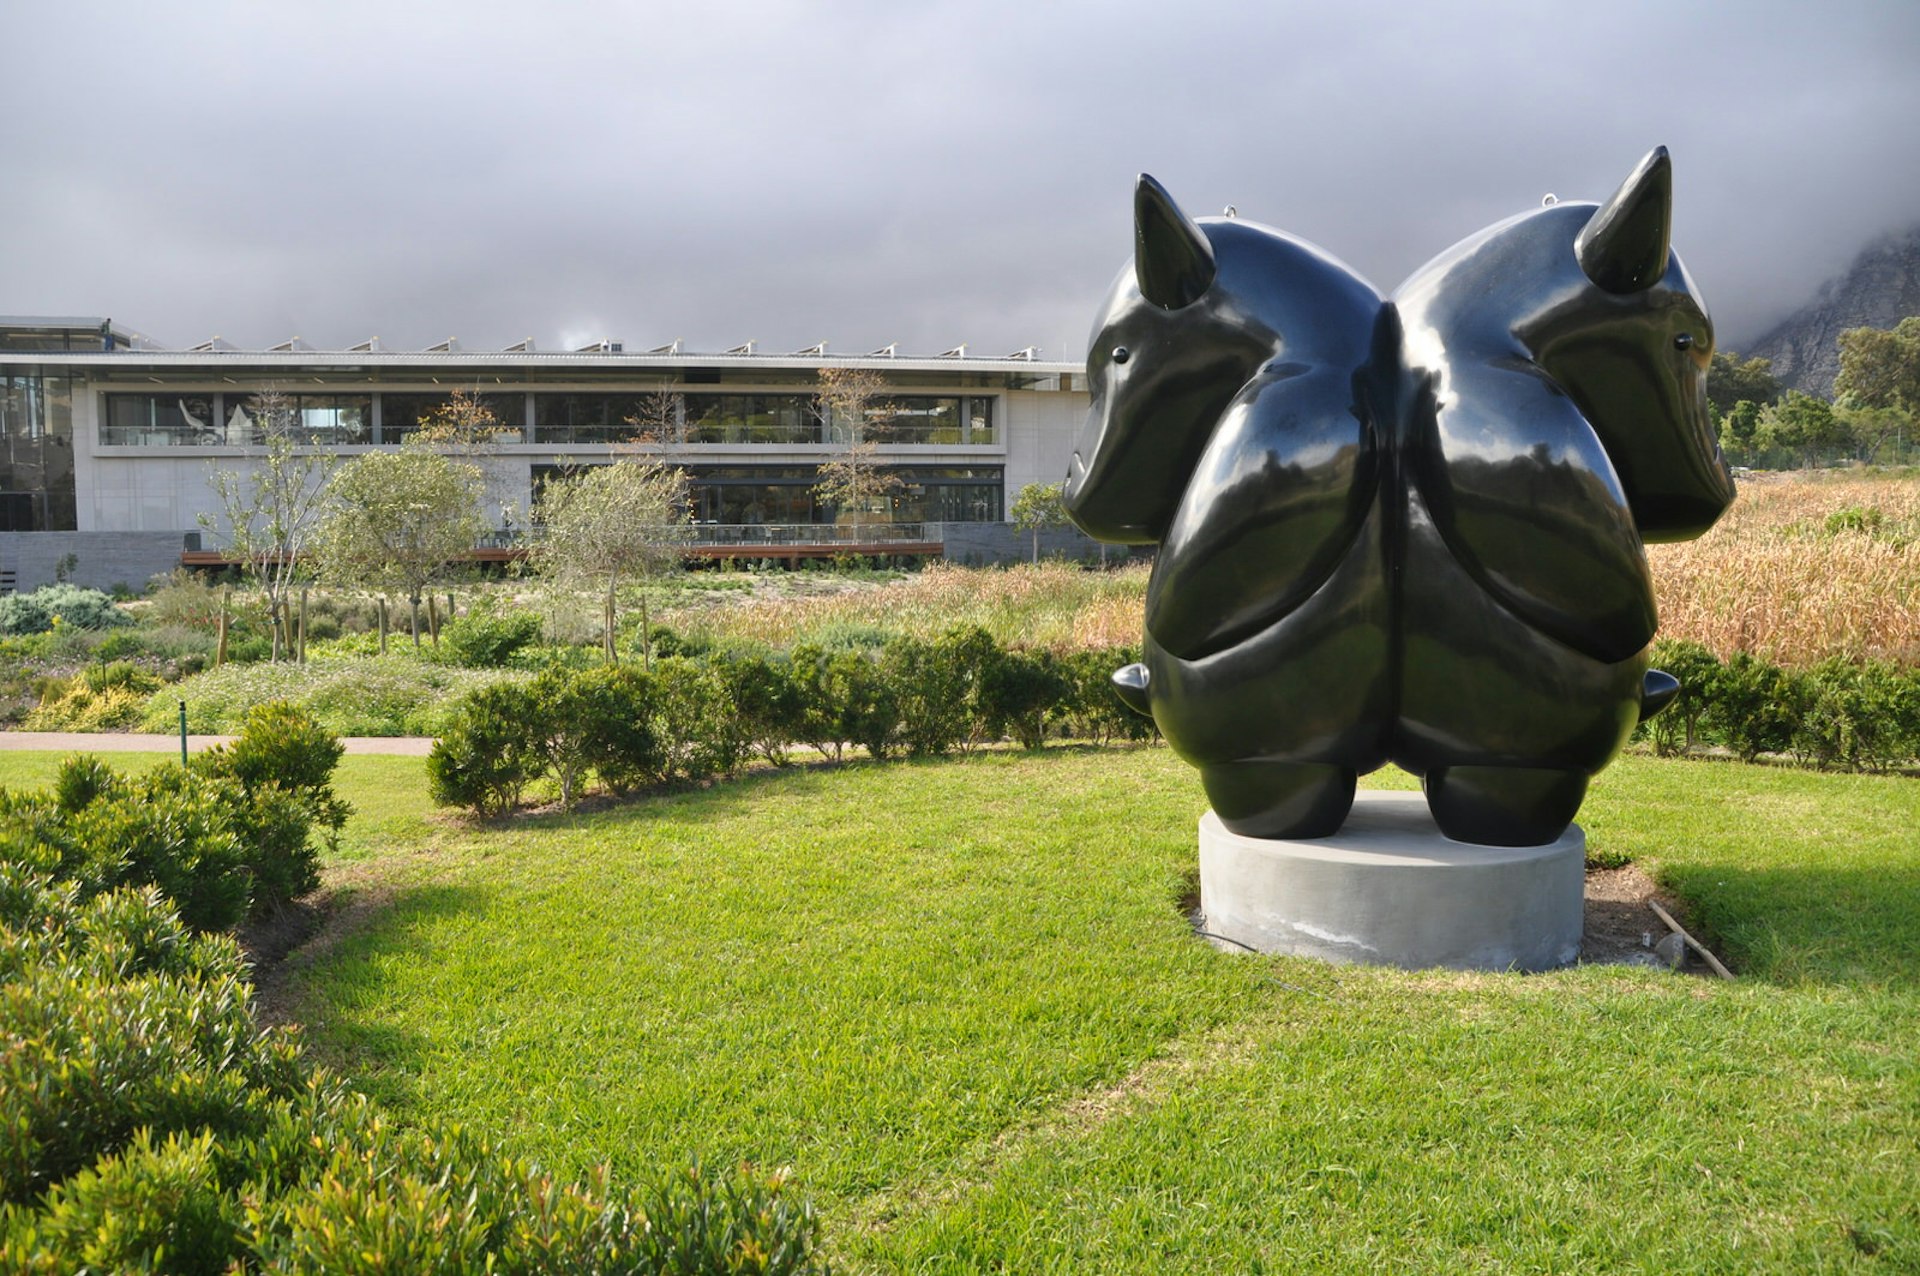 Sitting within a round section of lawn surrounded by a low hedge is a statue of a two-headed hippo-like creature with horns. In the background is the modern building housing the Norval Foundation art museum © Monica Suma / Lonely Planet